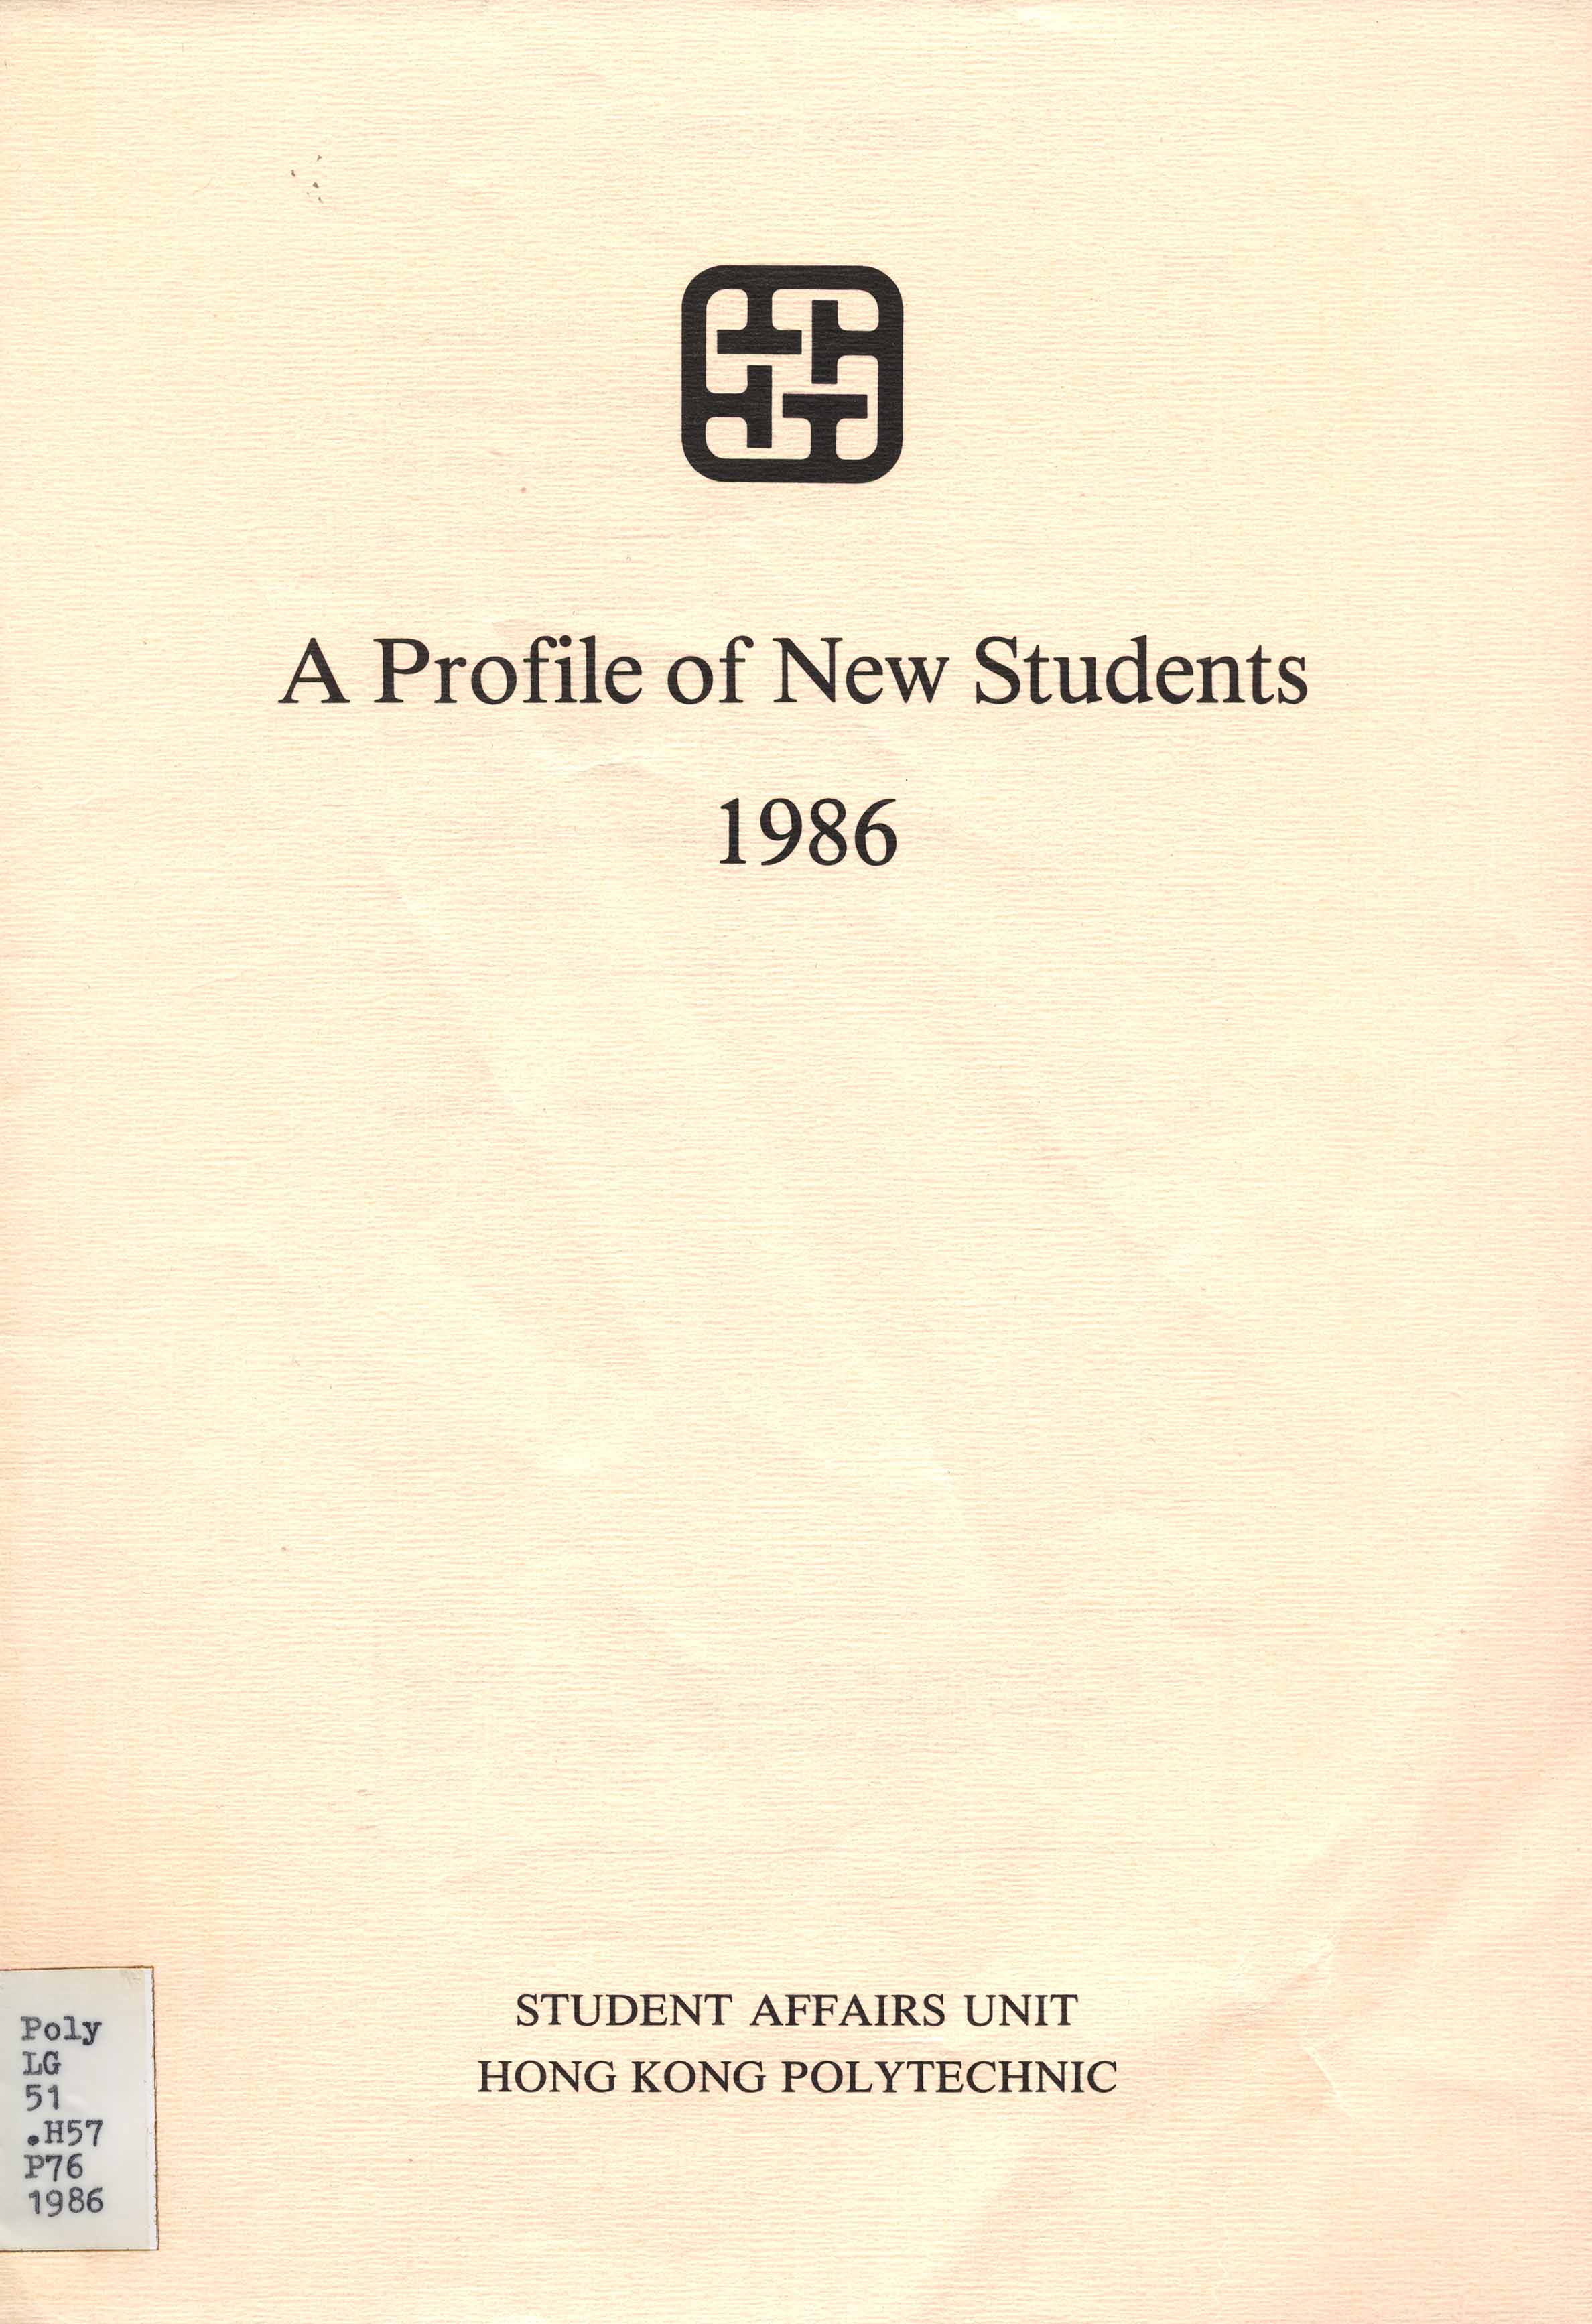 A Profile of new students [1986]